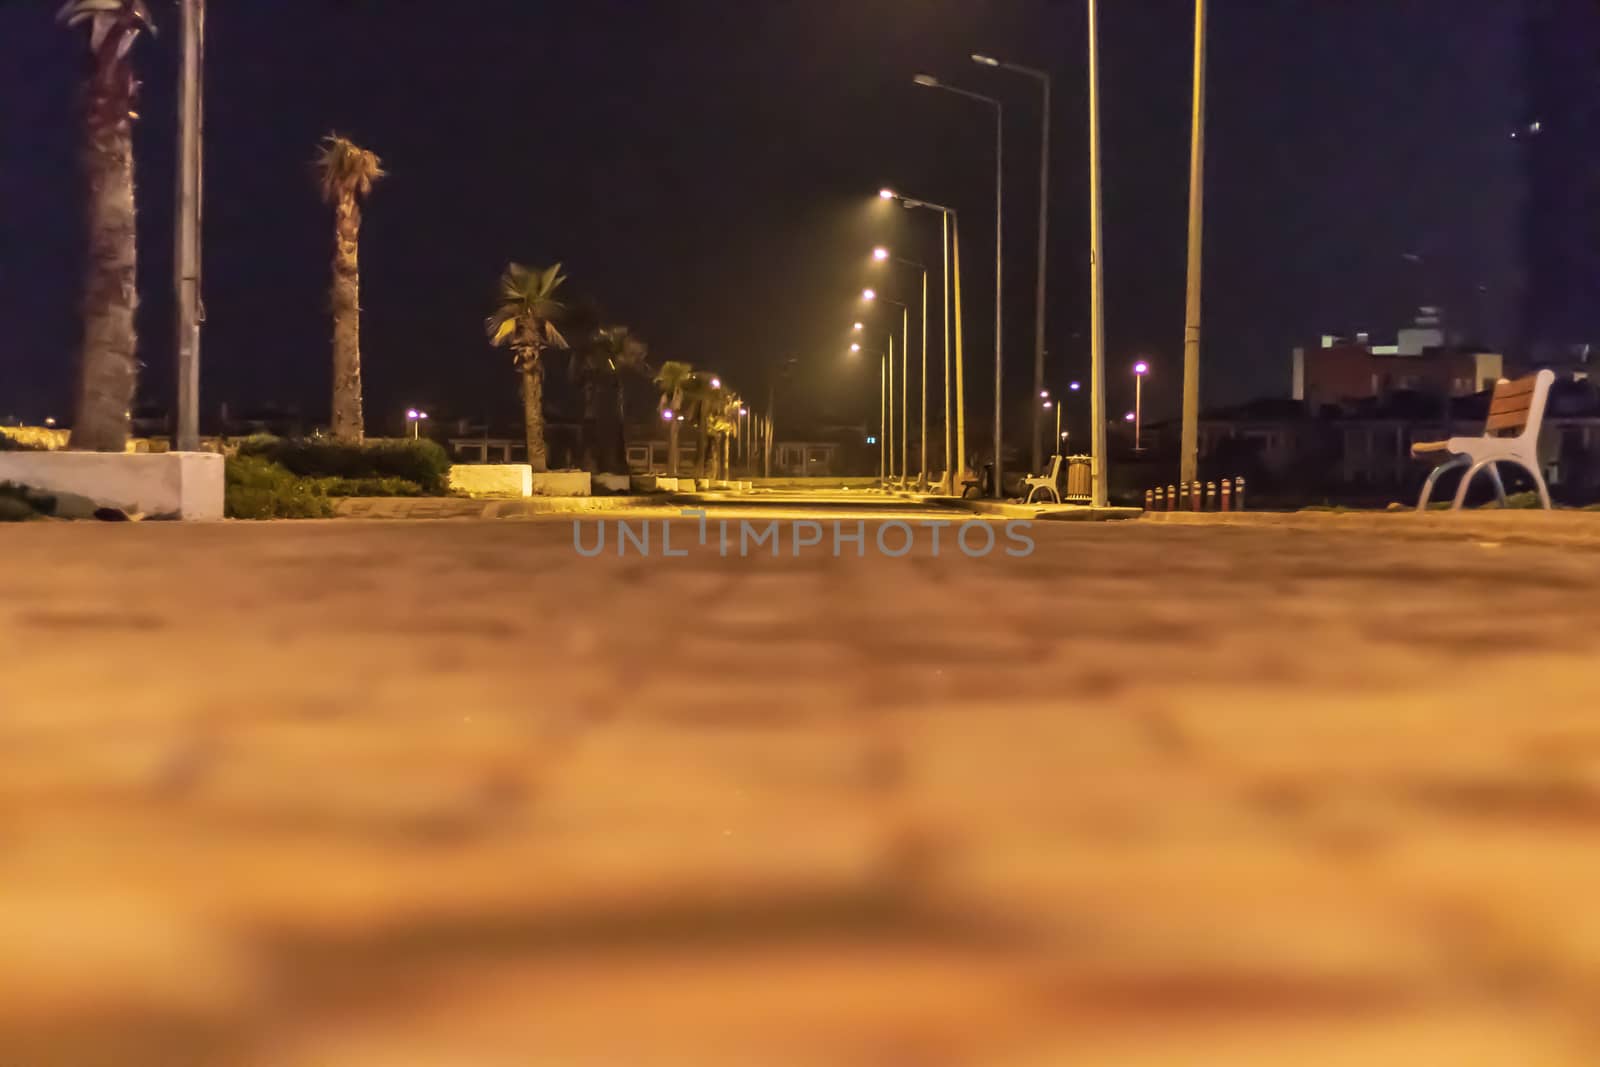 a crouching night shoot from coast road with city lights. photo has taken at izmir/turkey.